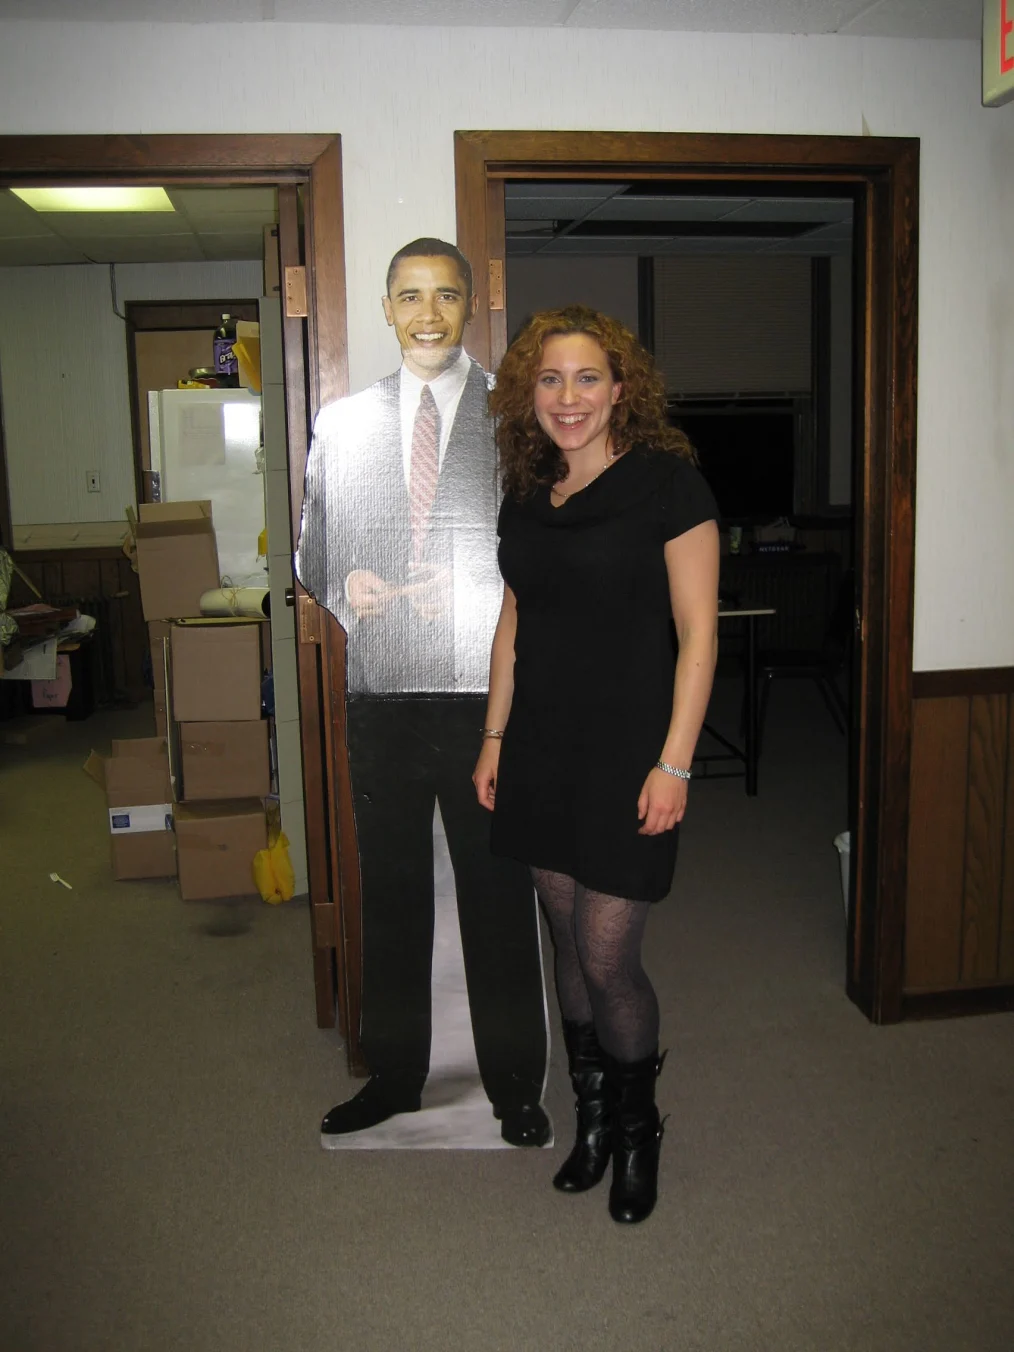 Beth Pollack is standing in an Obama campaign office smiling at the camera. Beth has very curly brown hair with gold highlights. She is wearing a black dress that hits above her knees, black lace tights, and black boots, with buckles, that end at her lower calf.  On both of her wrists are singular silver bracelets. Next to Beth is a life size cardboard cutout of Barack Obama. The cutout is an image of Barack Obama from the year 2007. In the cardboard cutout Barack Obama is wearing a black suit with red tie, black shoes, and is smiling at the camera. In the campaign office, there are two open wooden doors revealing two rooms. Inside the room on the right is darkness because the lights are off. Inside the room on the left are stacked boxes, a chair covered in coats, a refrigerator with a purple drink sitting on top of it, and a lone fork on the floor.